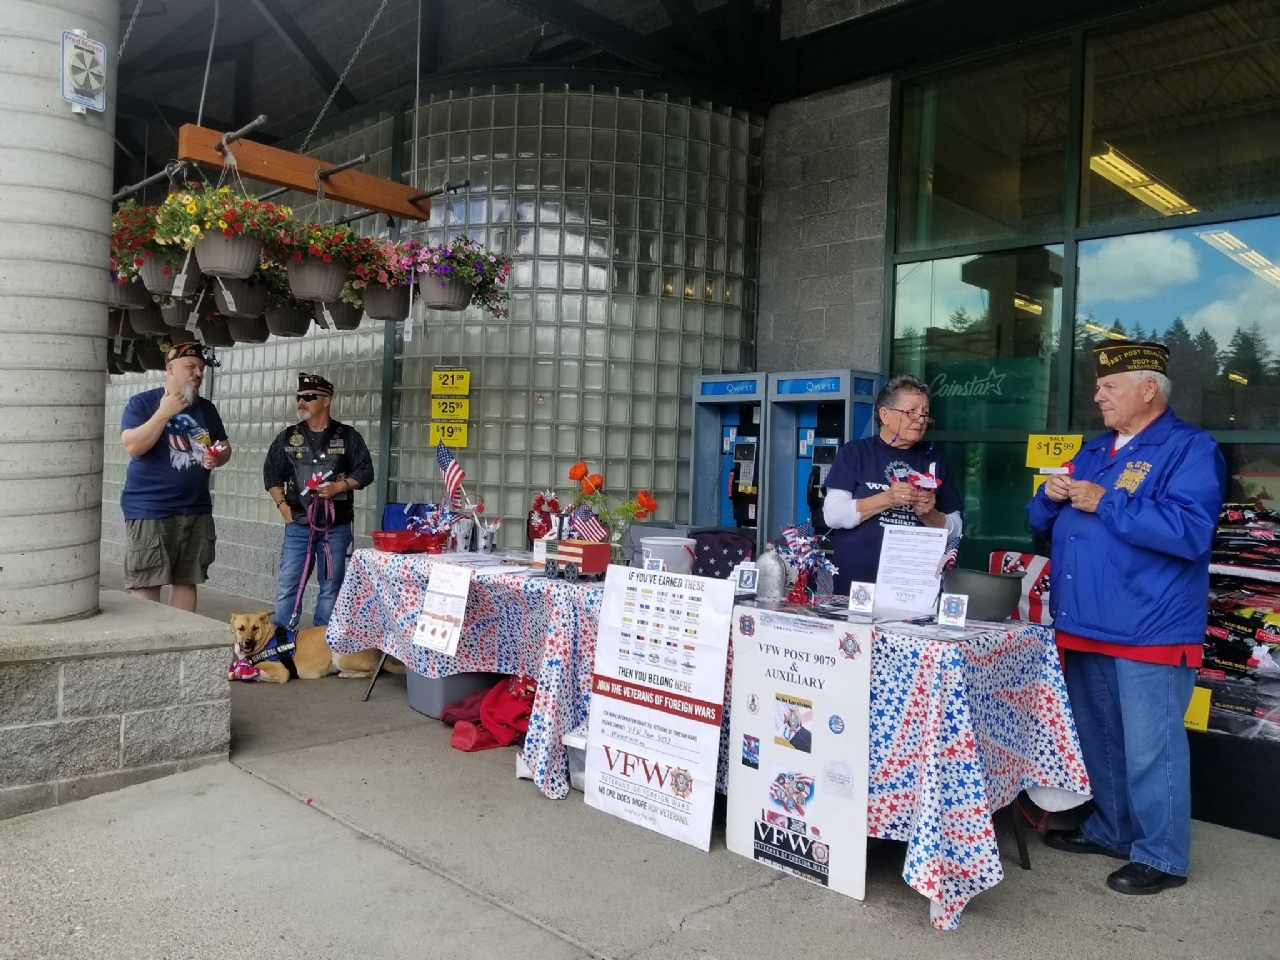 Memorial Day weekend Buddy Poppy drive at Bethel Station Fred Meyer